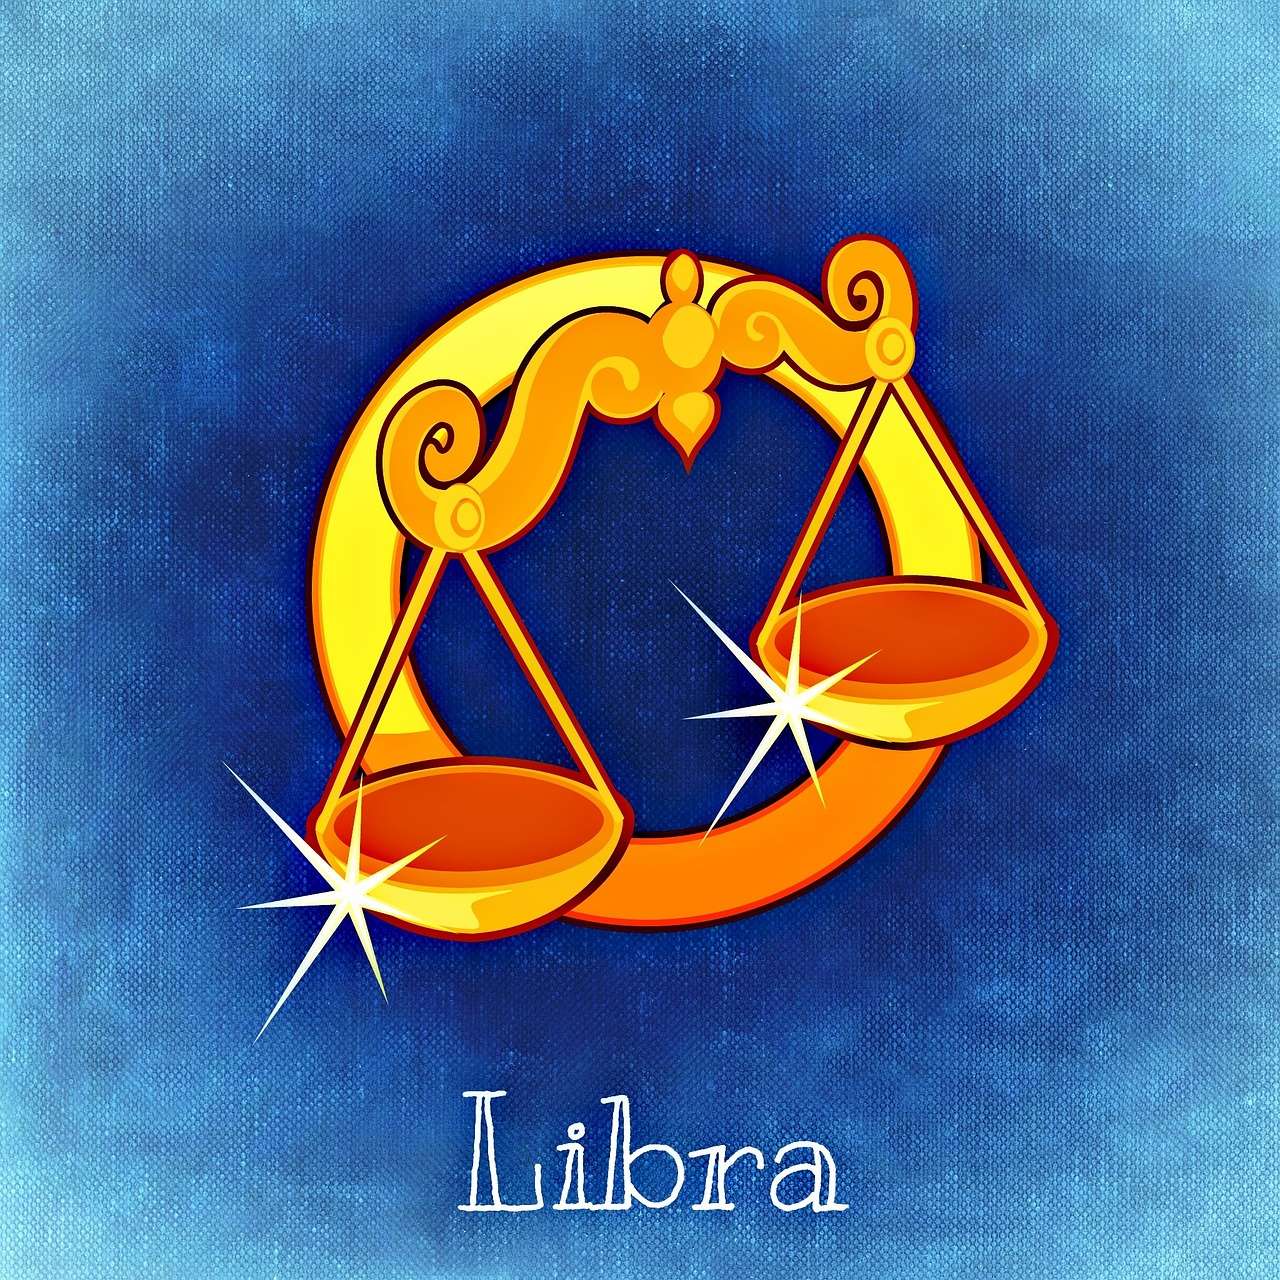 what planet rules Libra